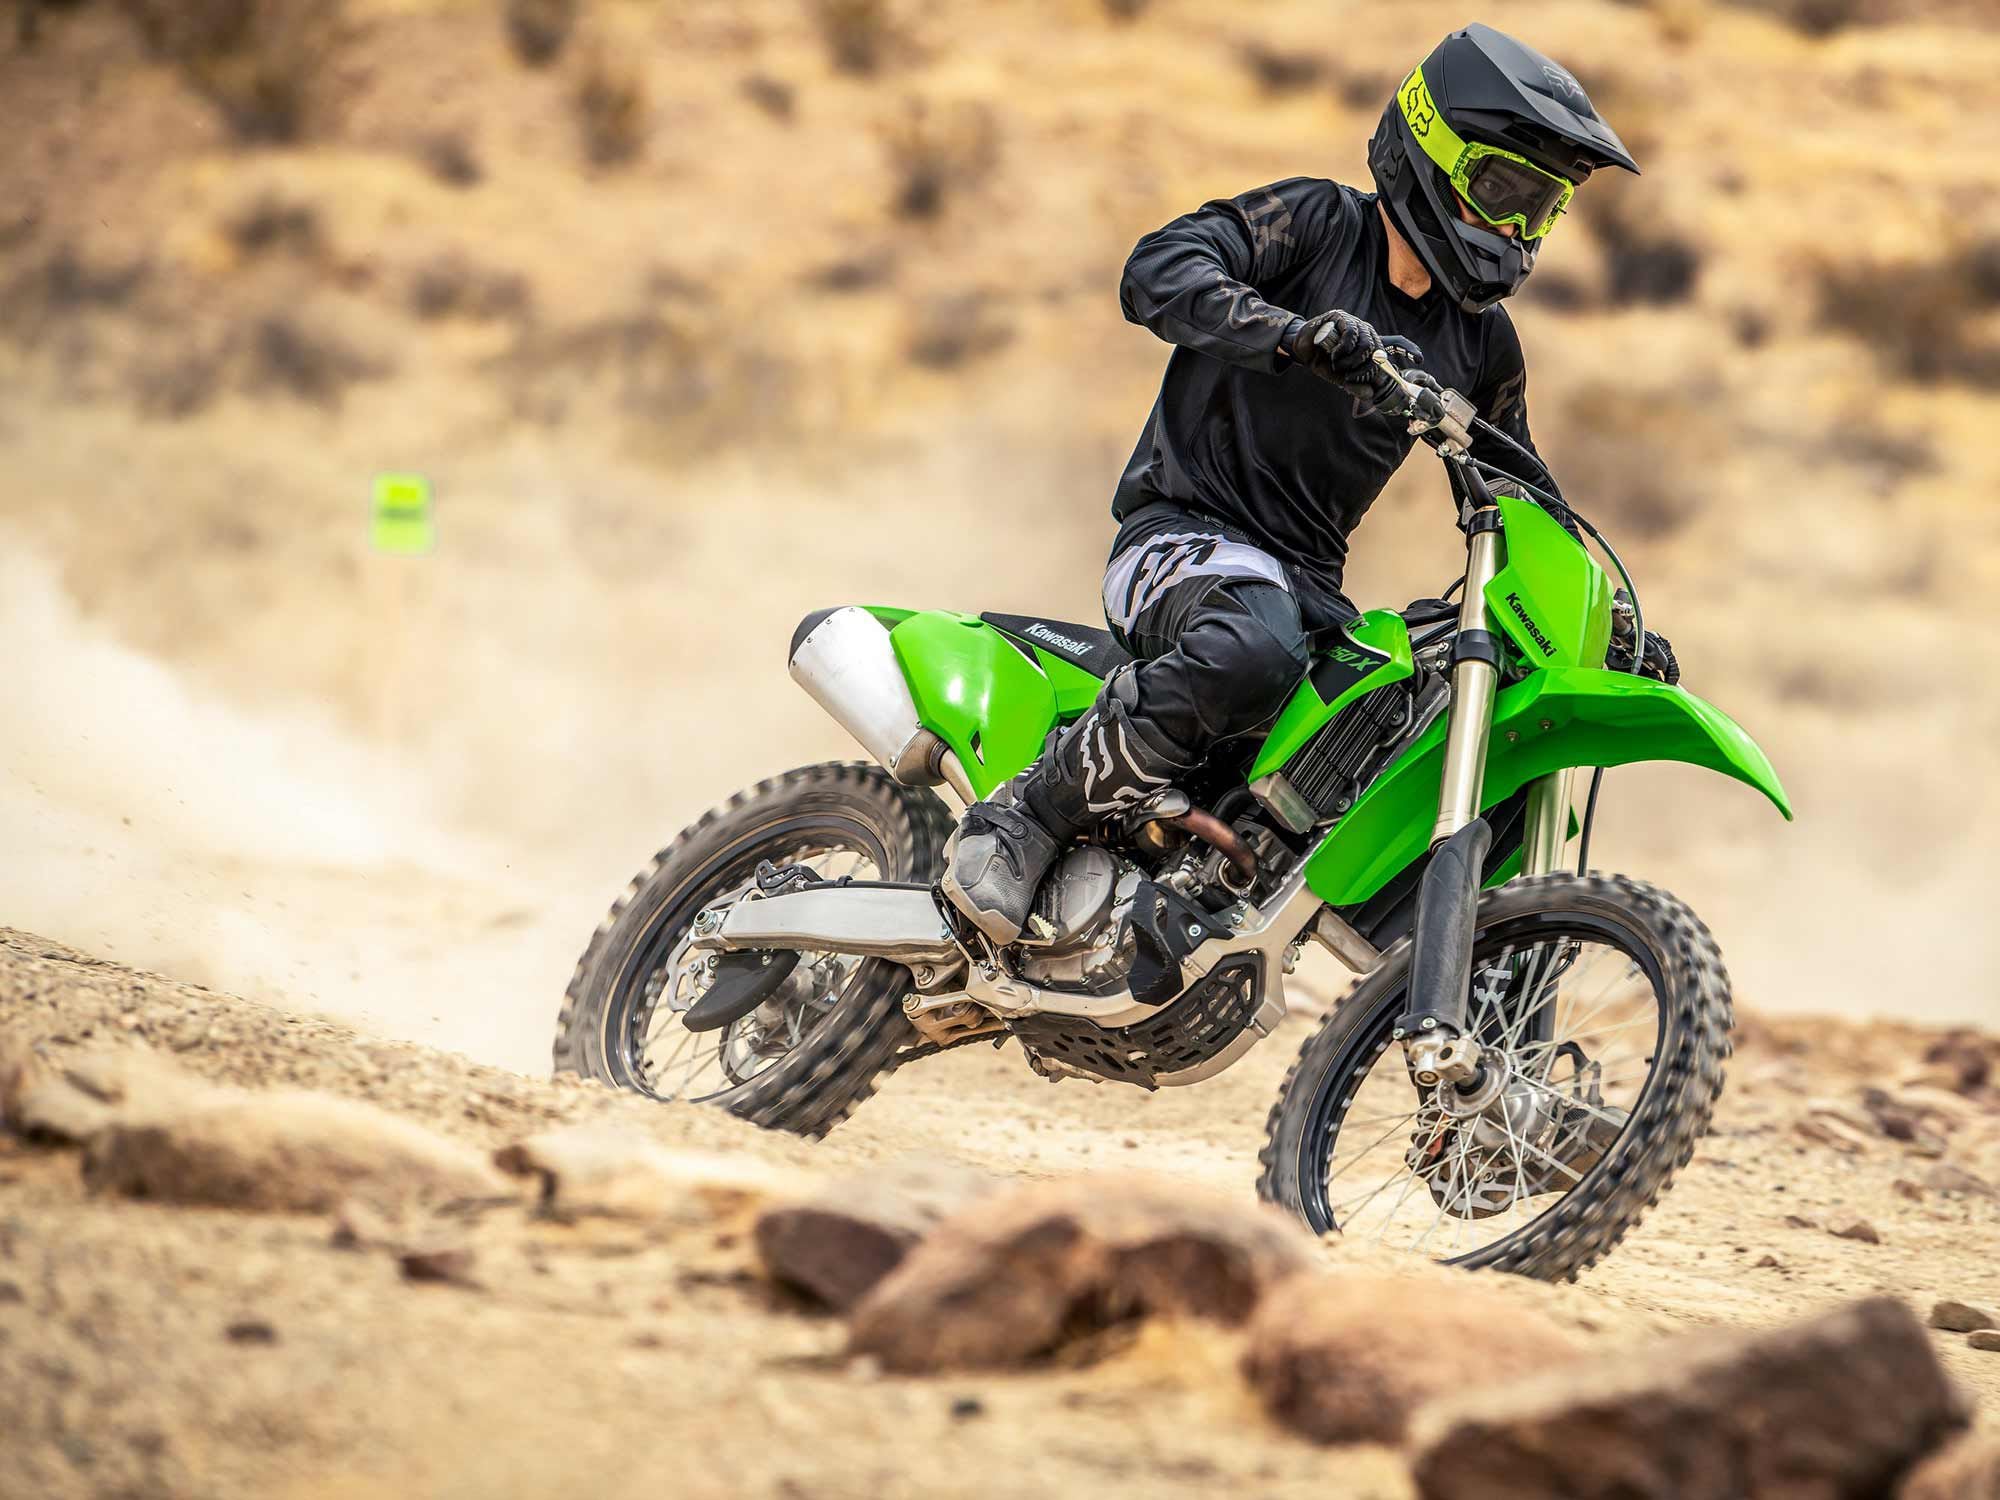 Updated engine and suspension components promise an improved experience on the trail.